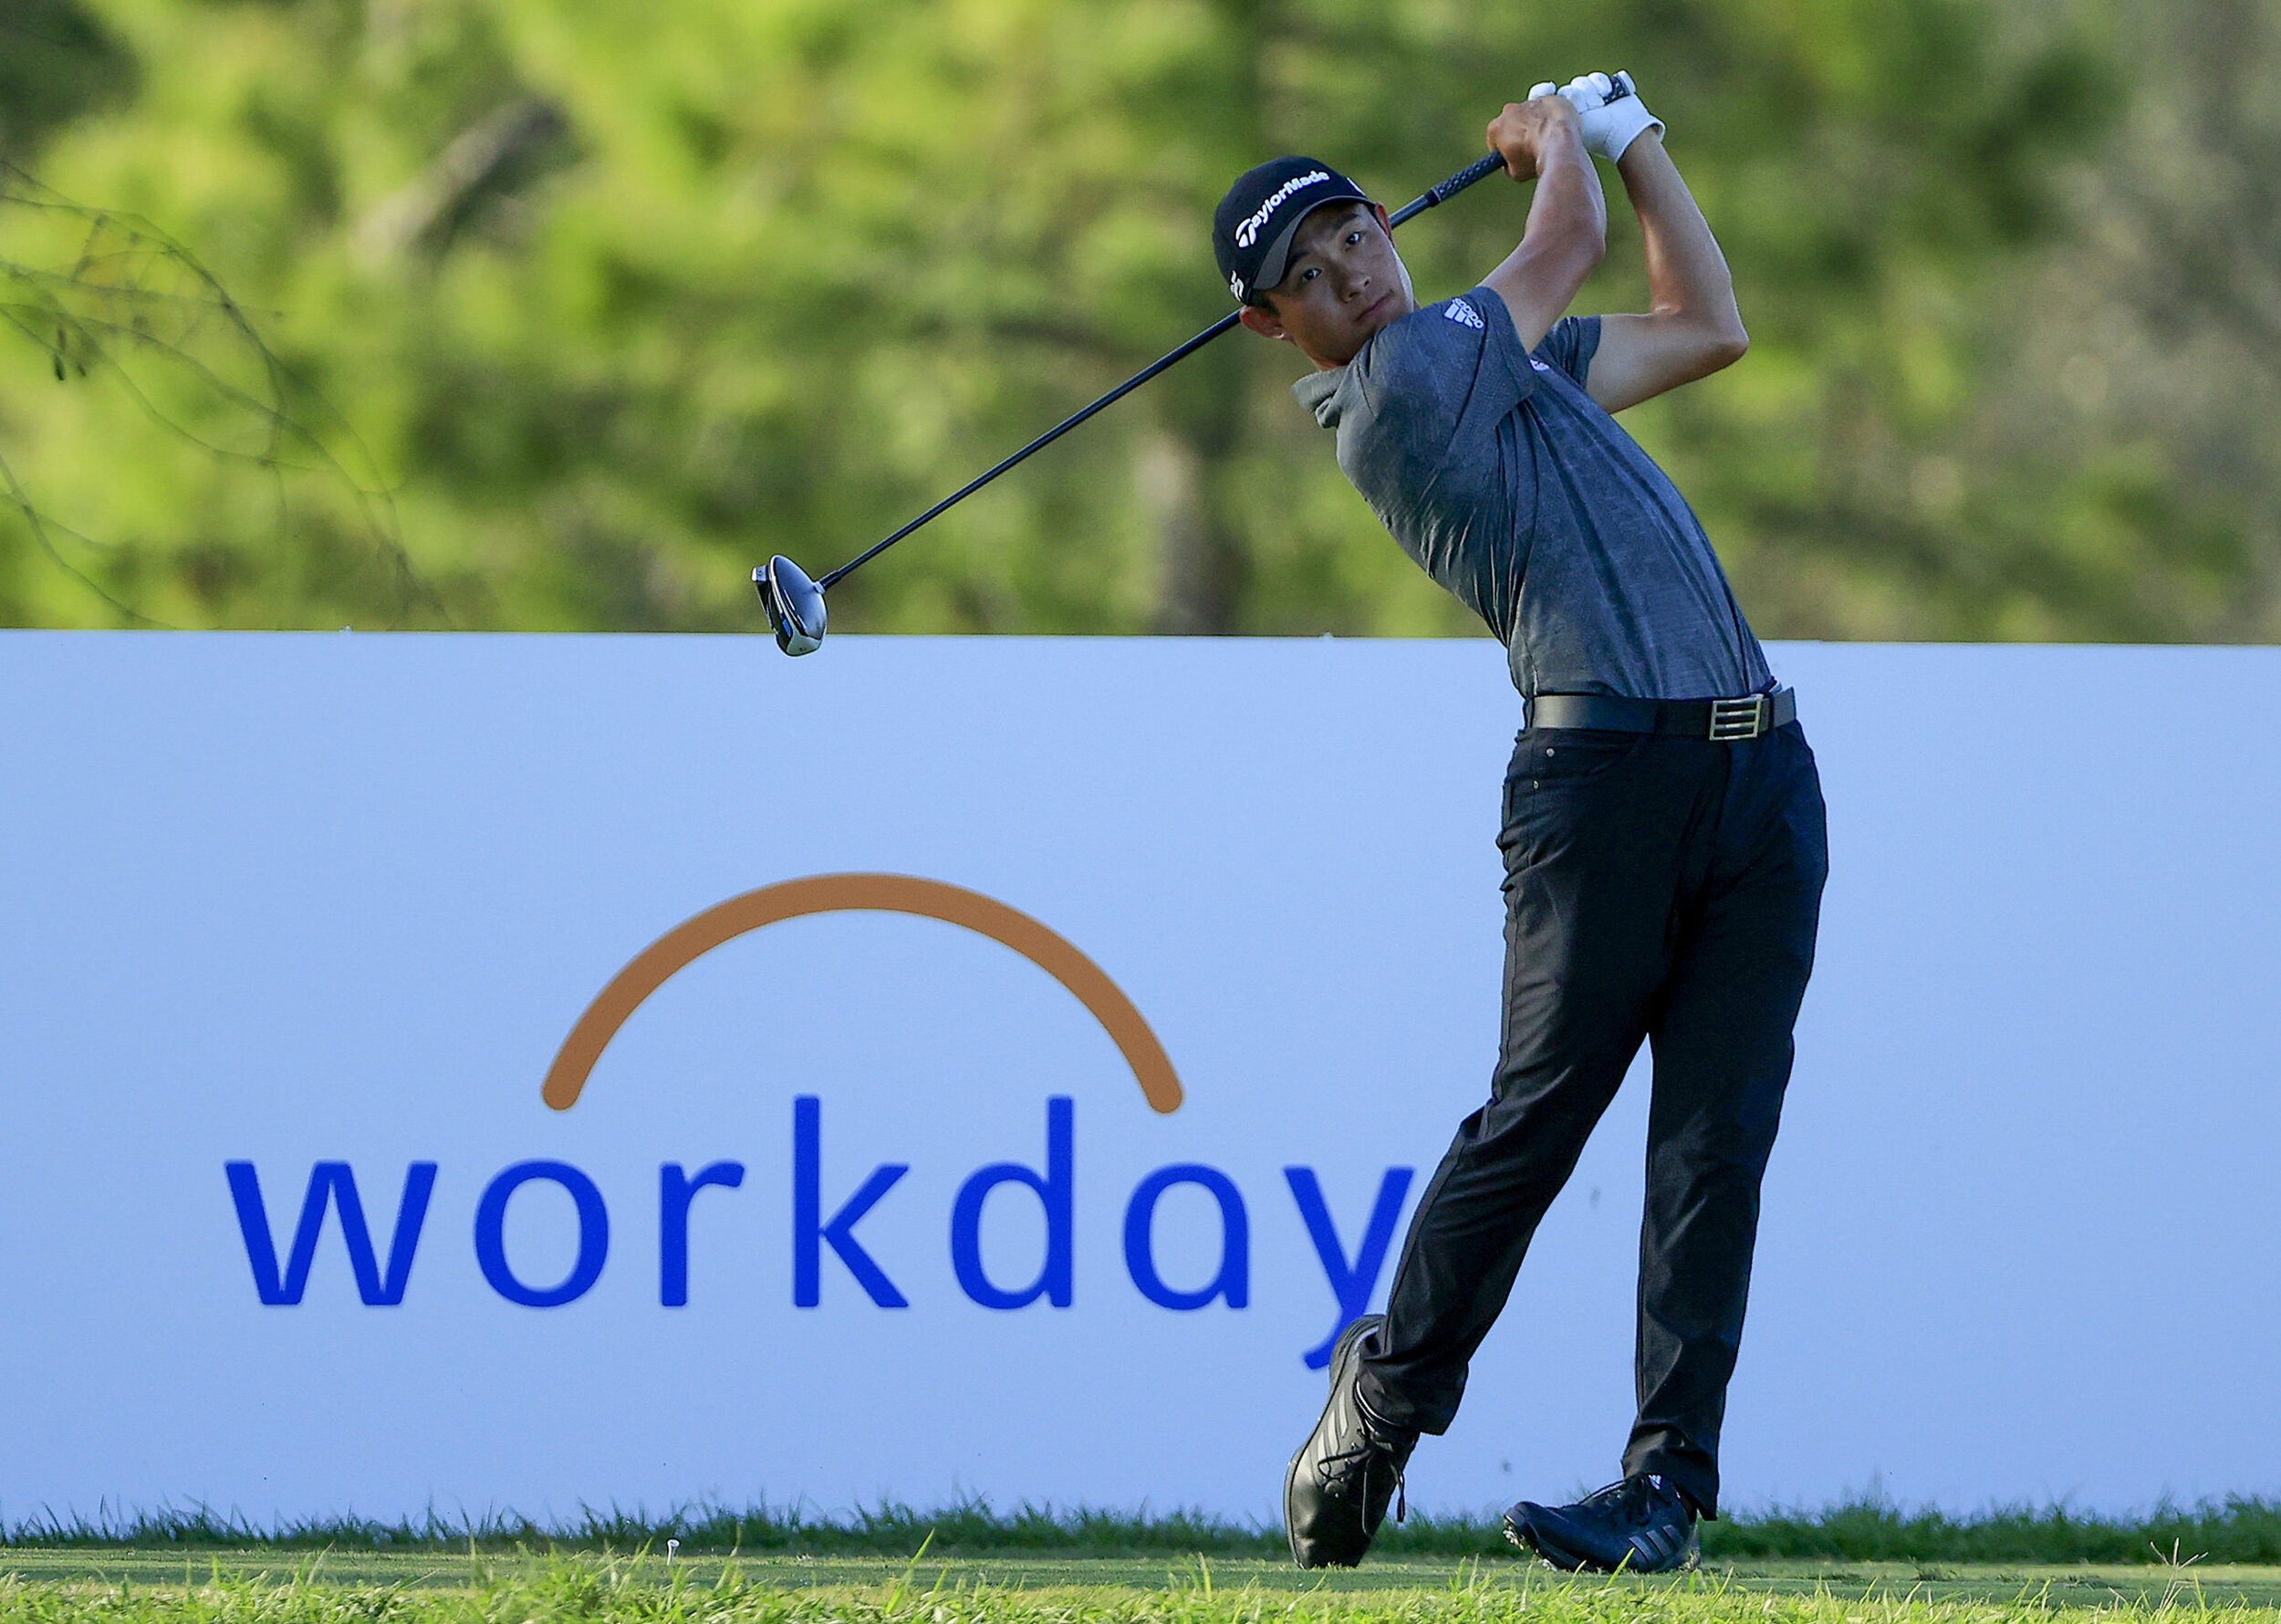  BRADENTON, FLORIDA - FEBRUARY 28: Collin Morikawa of the United States plays his shot from the 16th tee during the final round of World Golf Championships-Workday Championship at The Concession on February 28, 2021 in Bradenton, Florida. (Photo by S